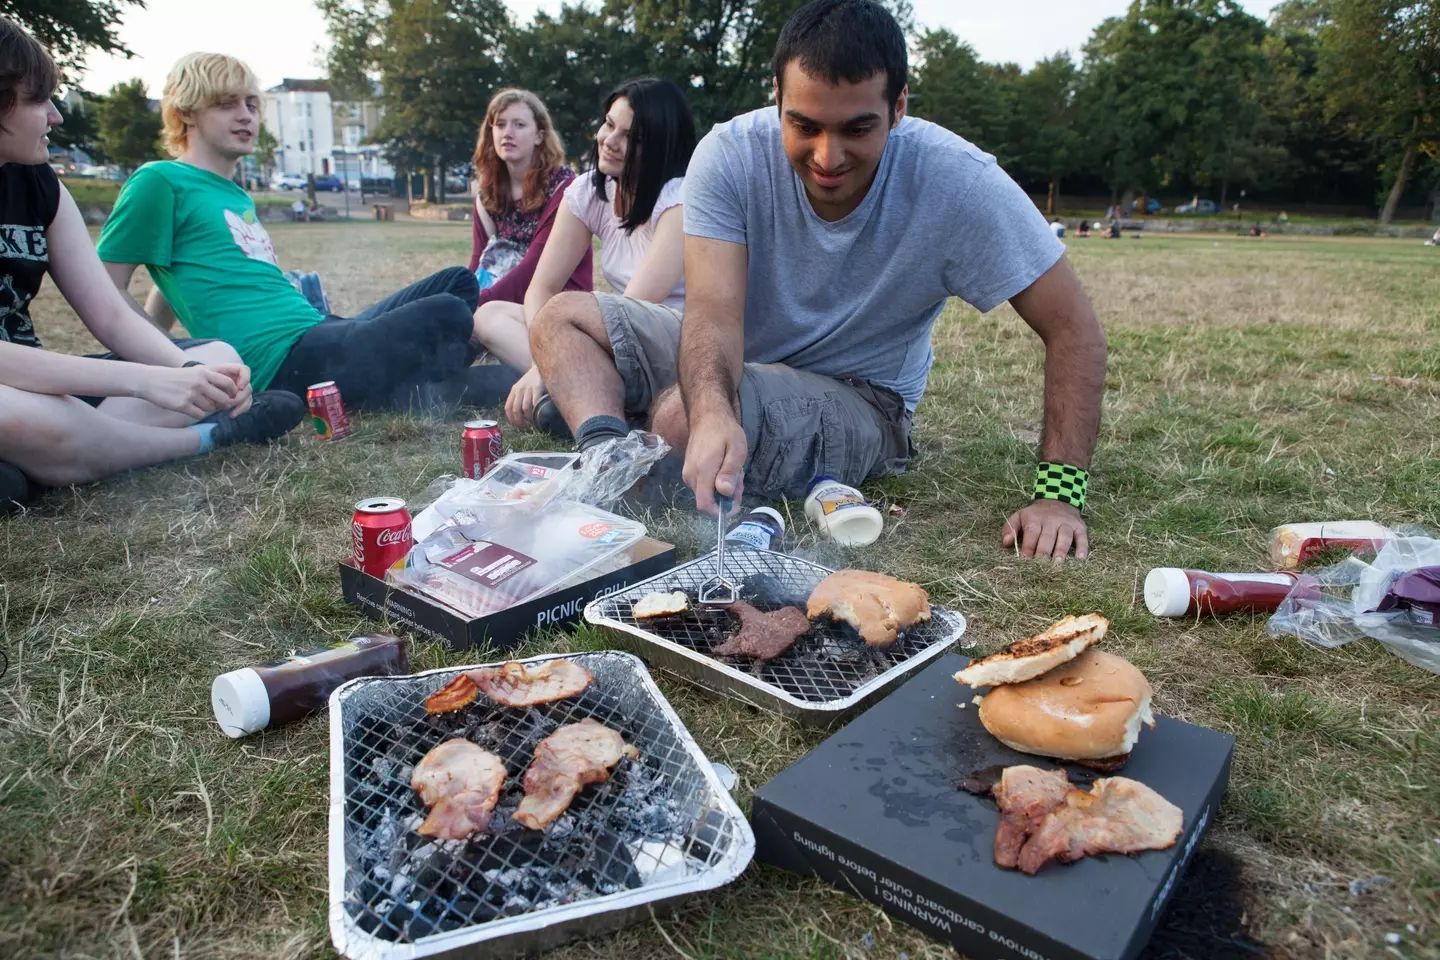 A group of friends enjoying a disposable barbecue in the park.